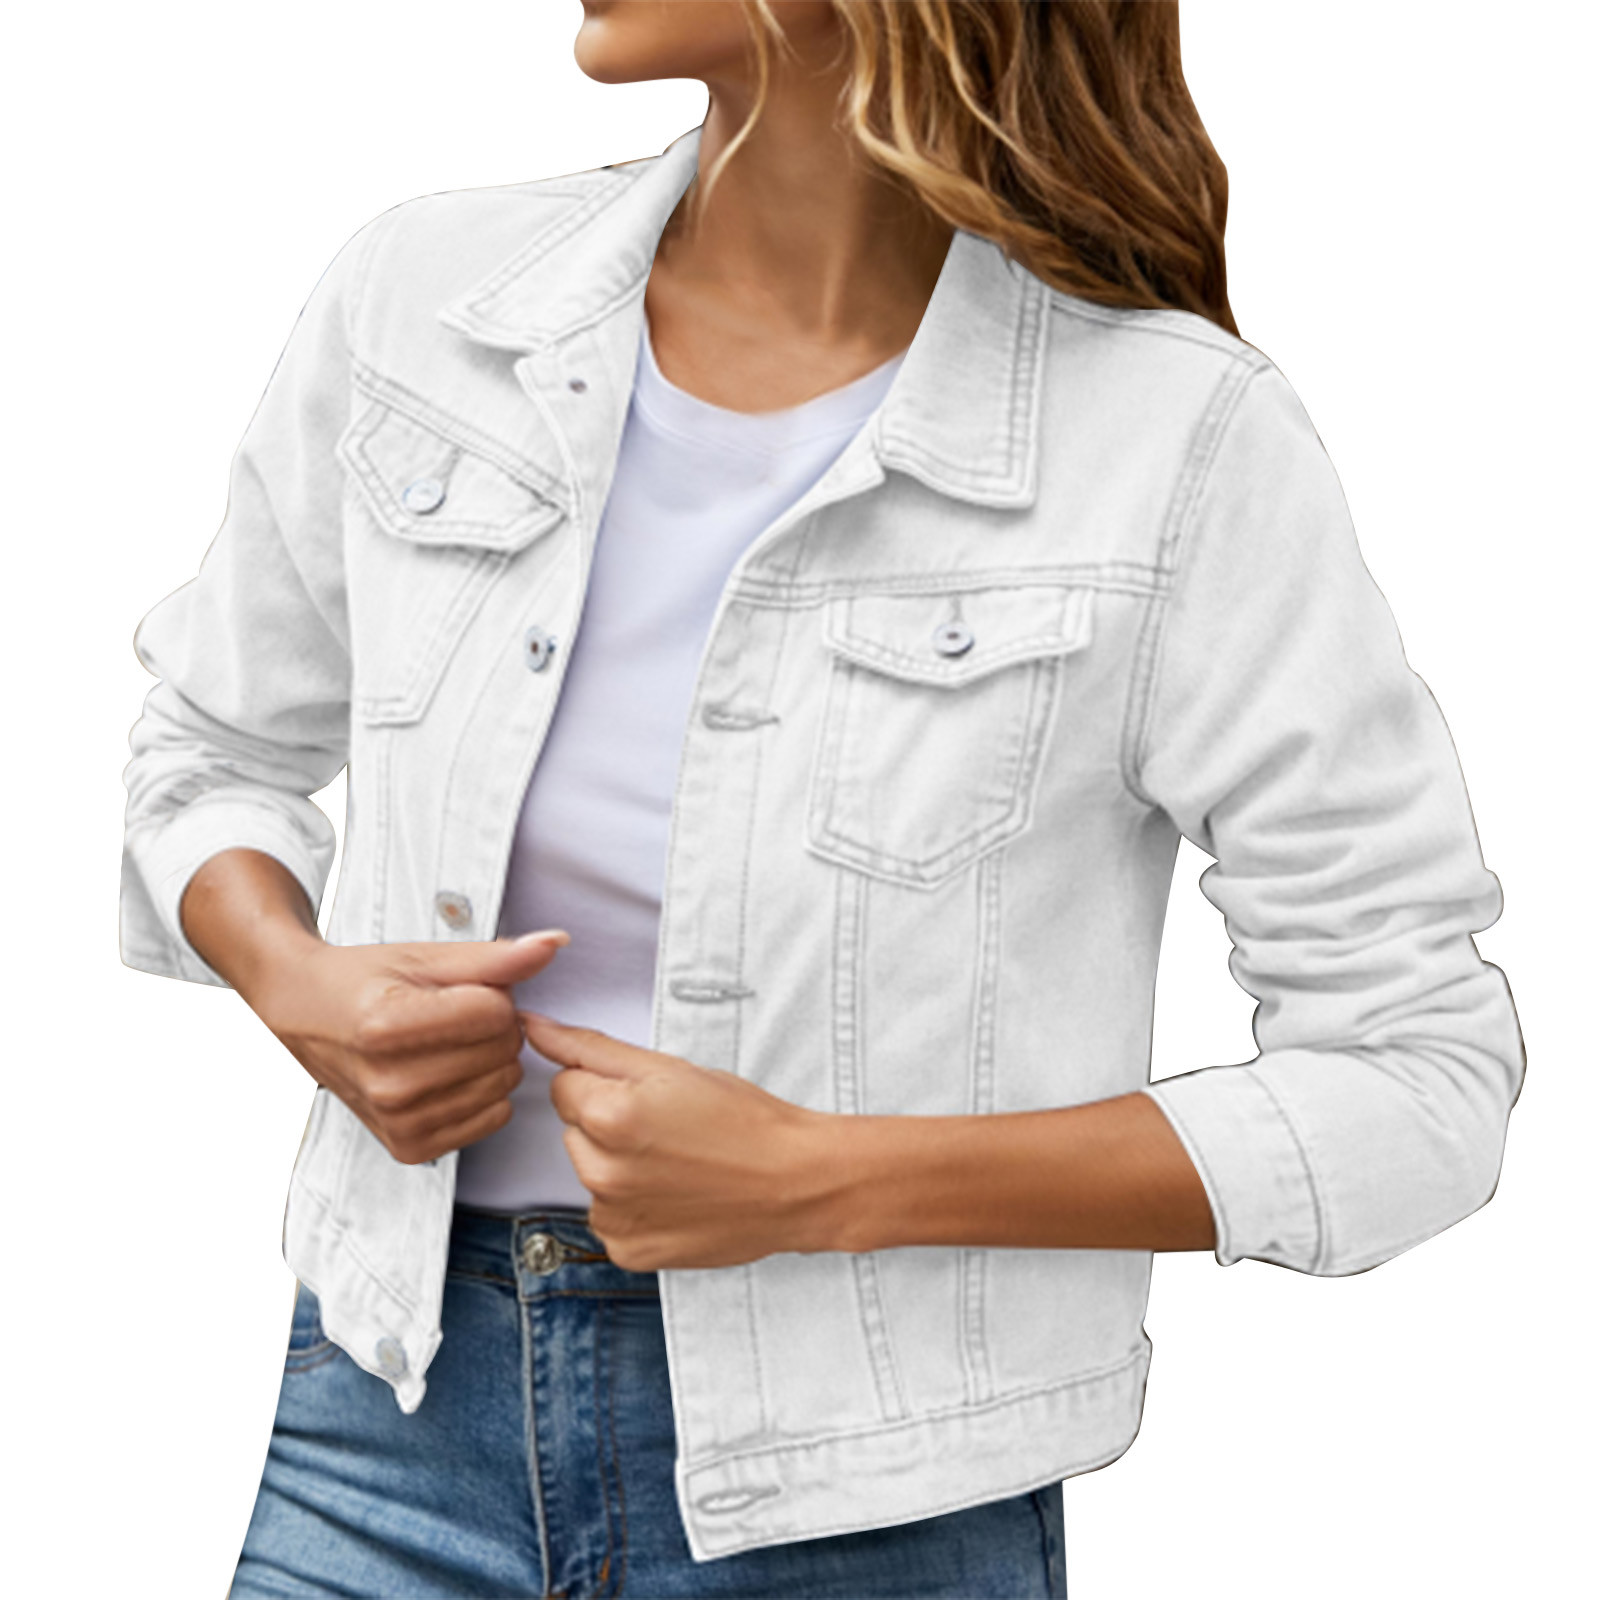 iOPQO womens sweaters Women's Basic Solid Color Button Down Denim Cotton Jacket With Pockets Denim Jacket Coat Women's Denim Jackets White L - image 1 of 8